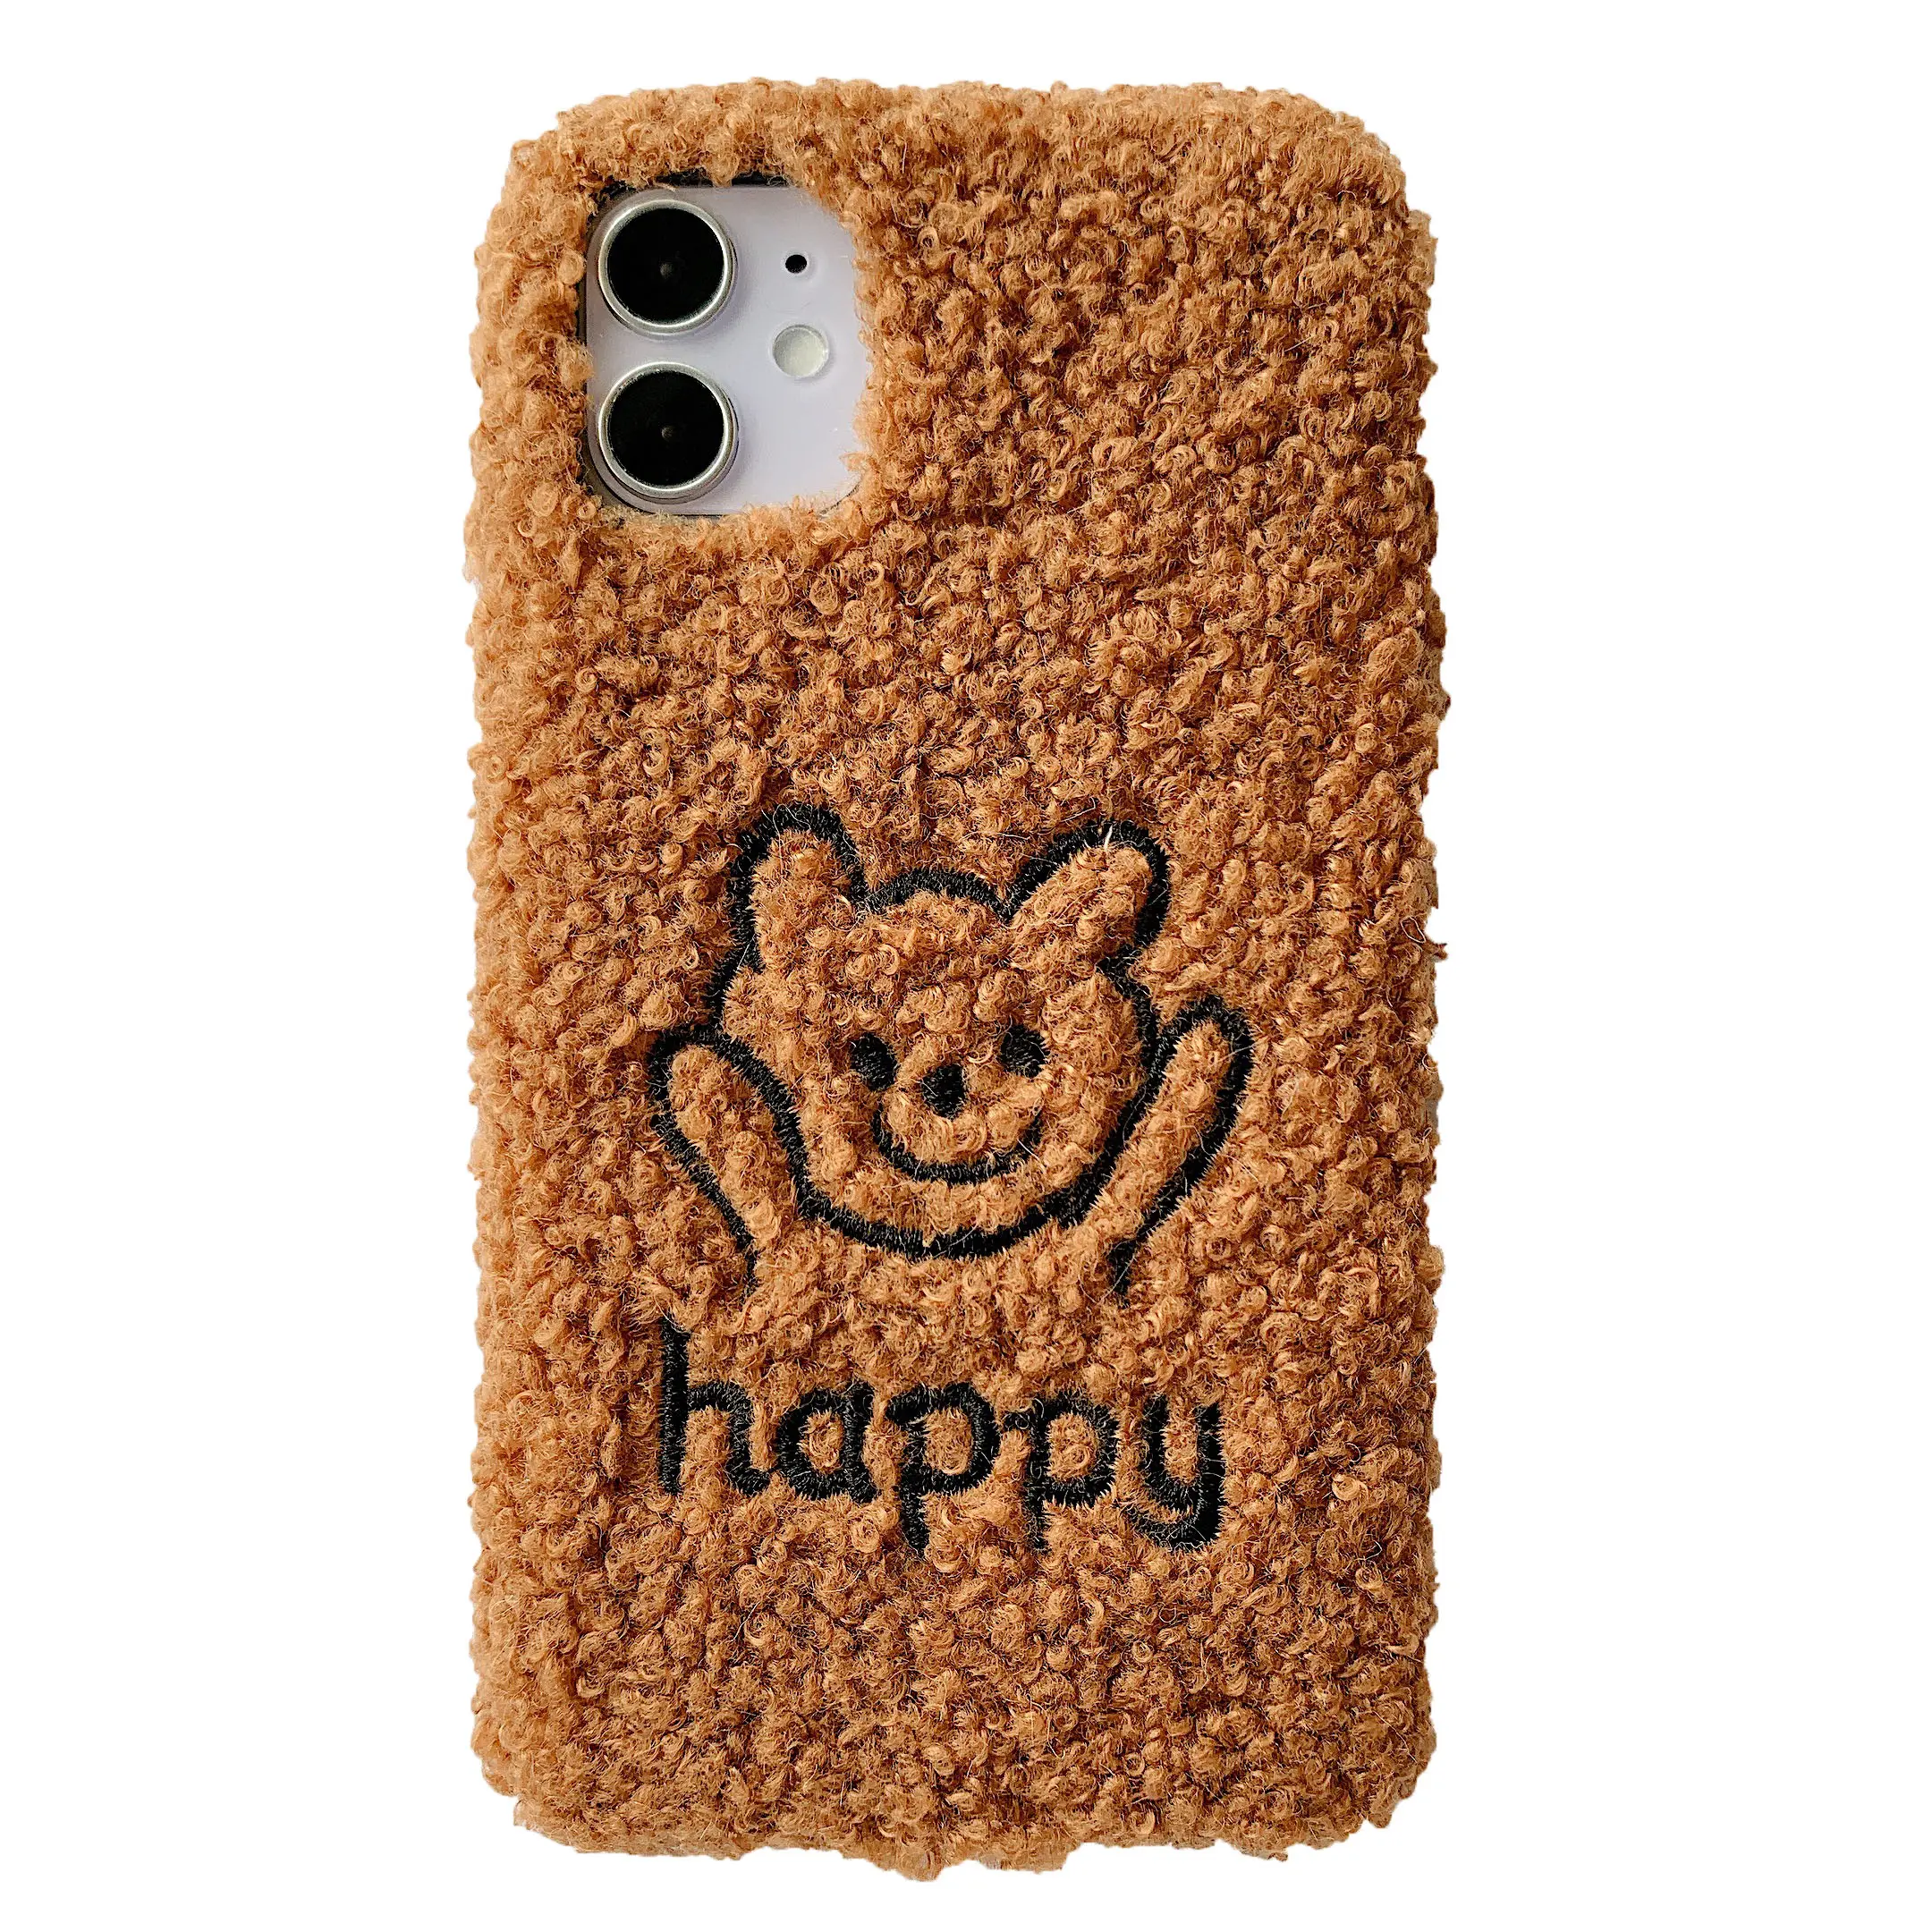 Yapears Plush Stuffed cute Case for iphone 11 Girls Women Ladies Plush Phone Case Cover for iPhone 11 series happy bear style